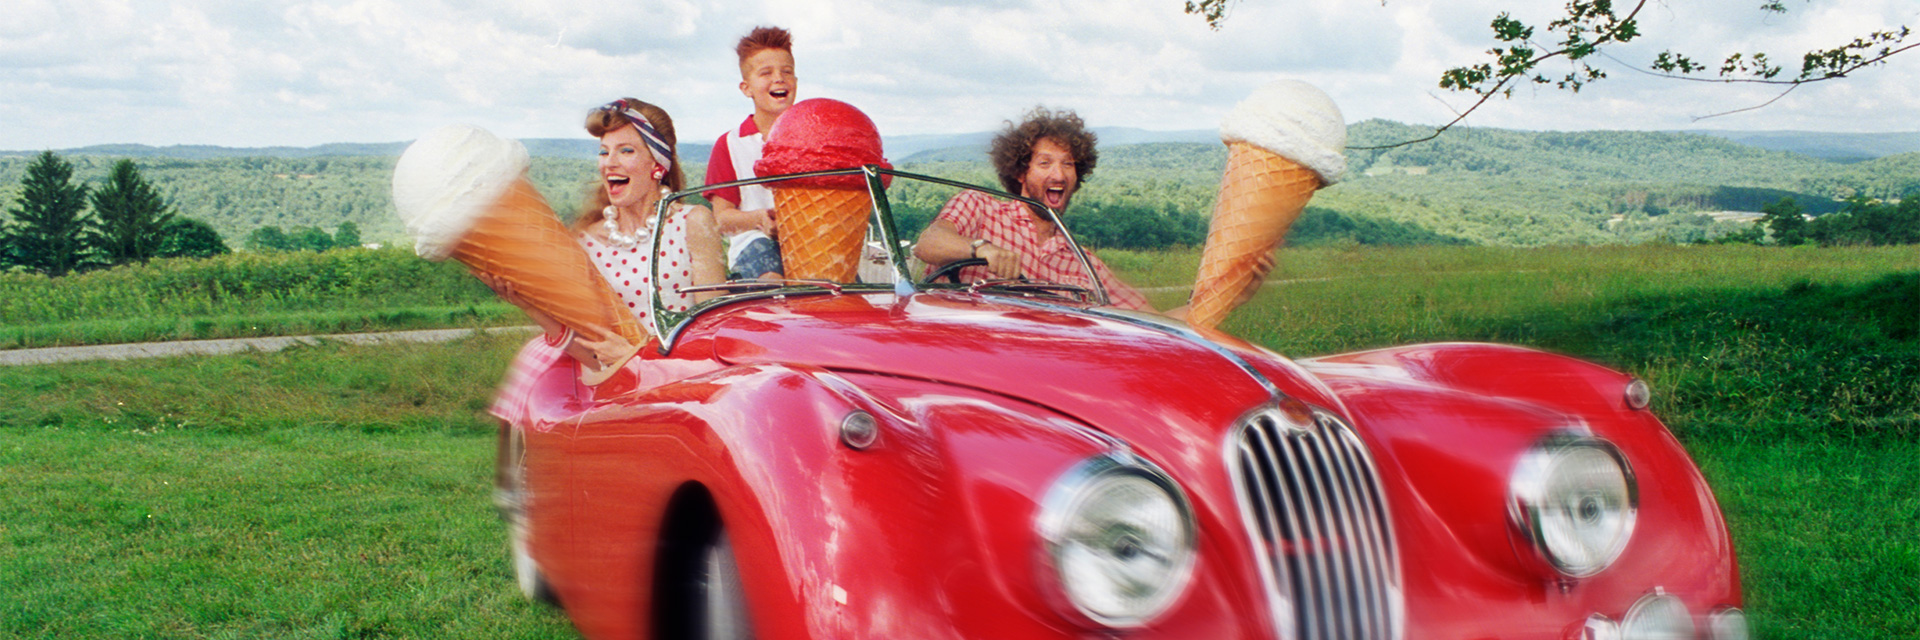 a family in a vintage red car in a field holding up giant ice cream cones